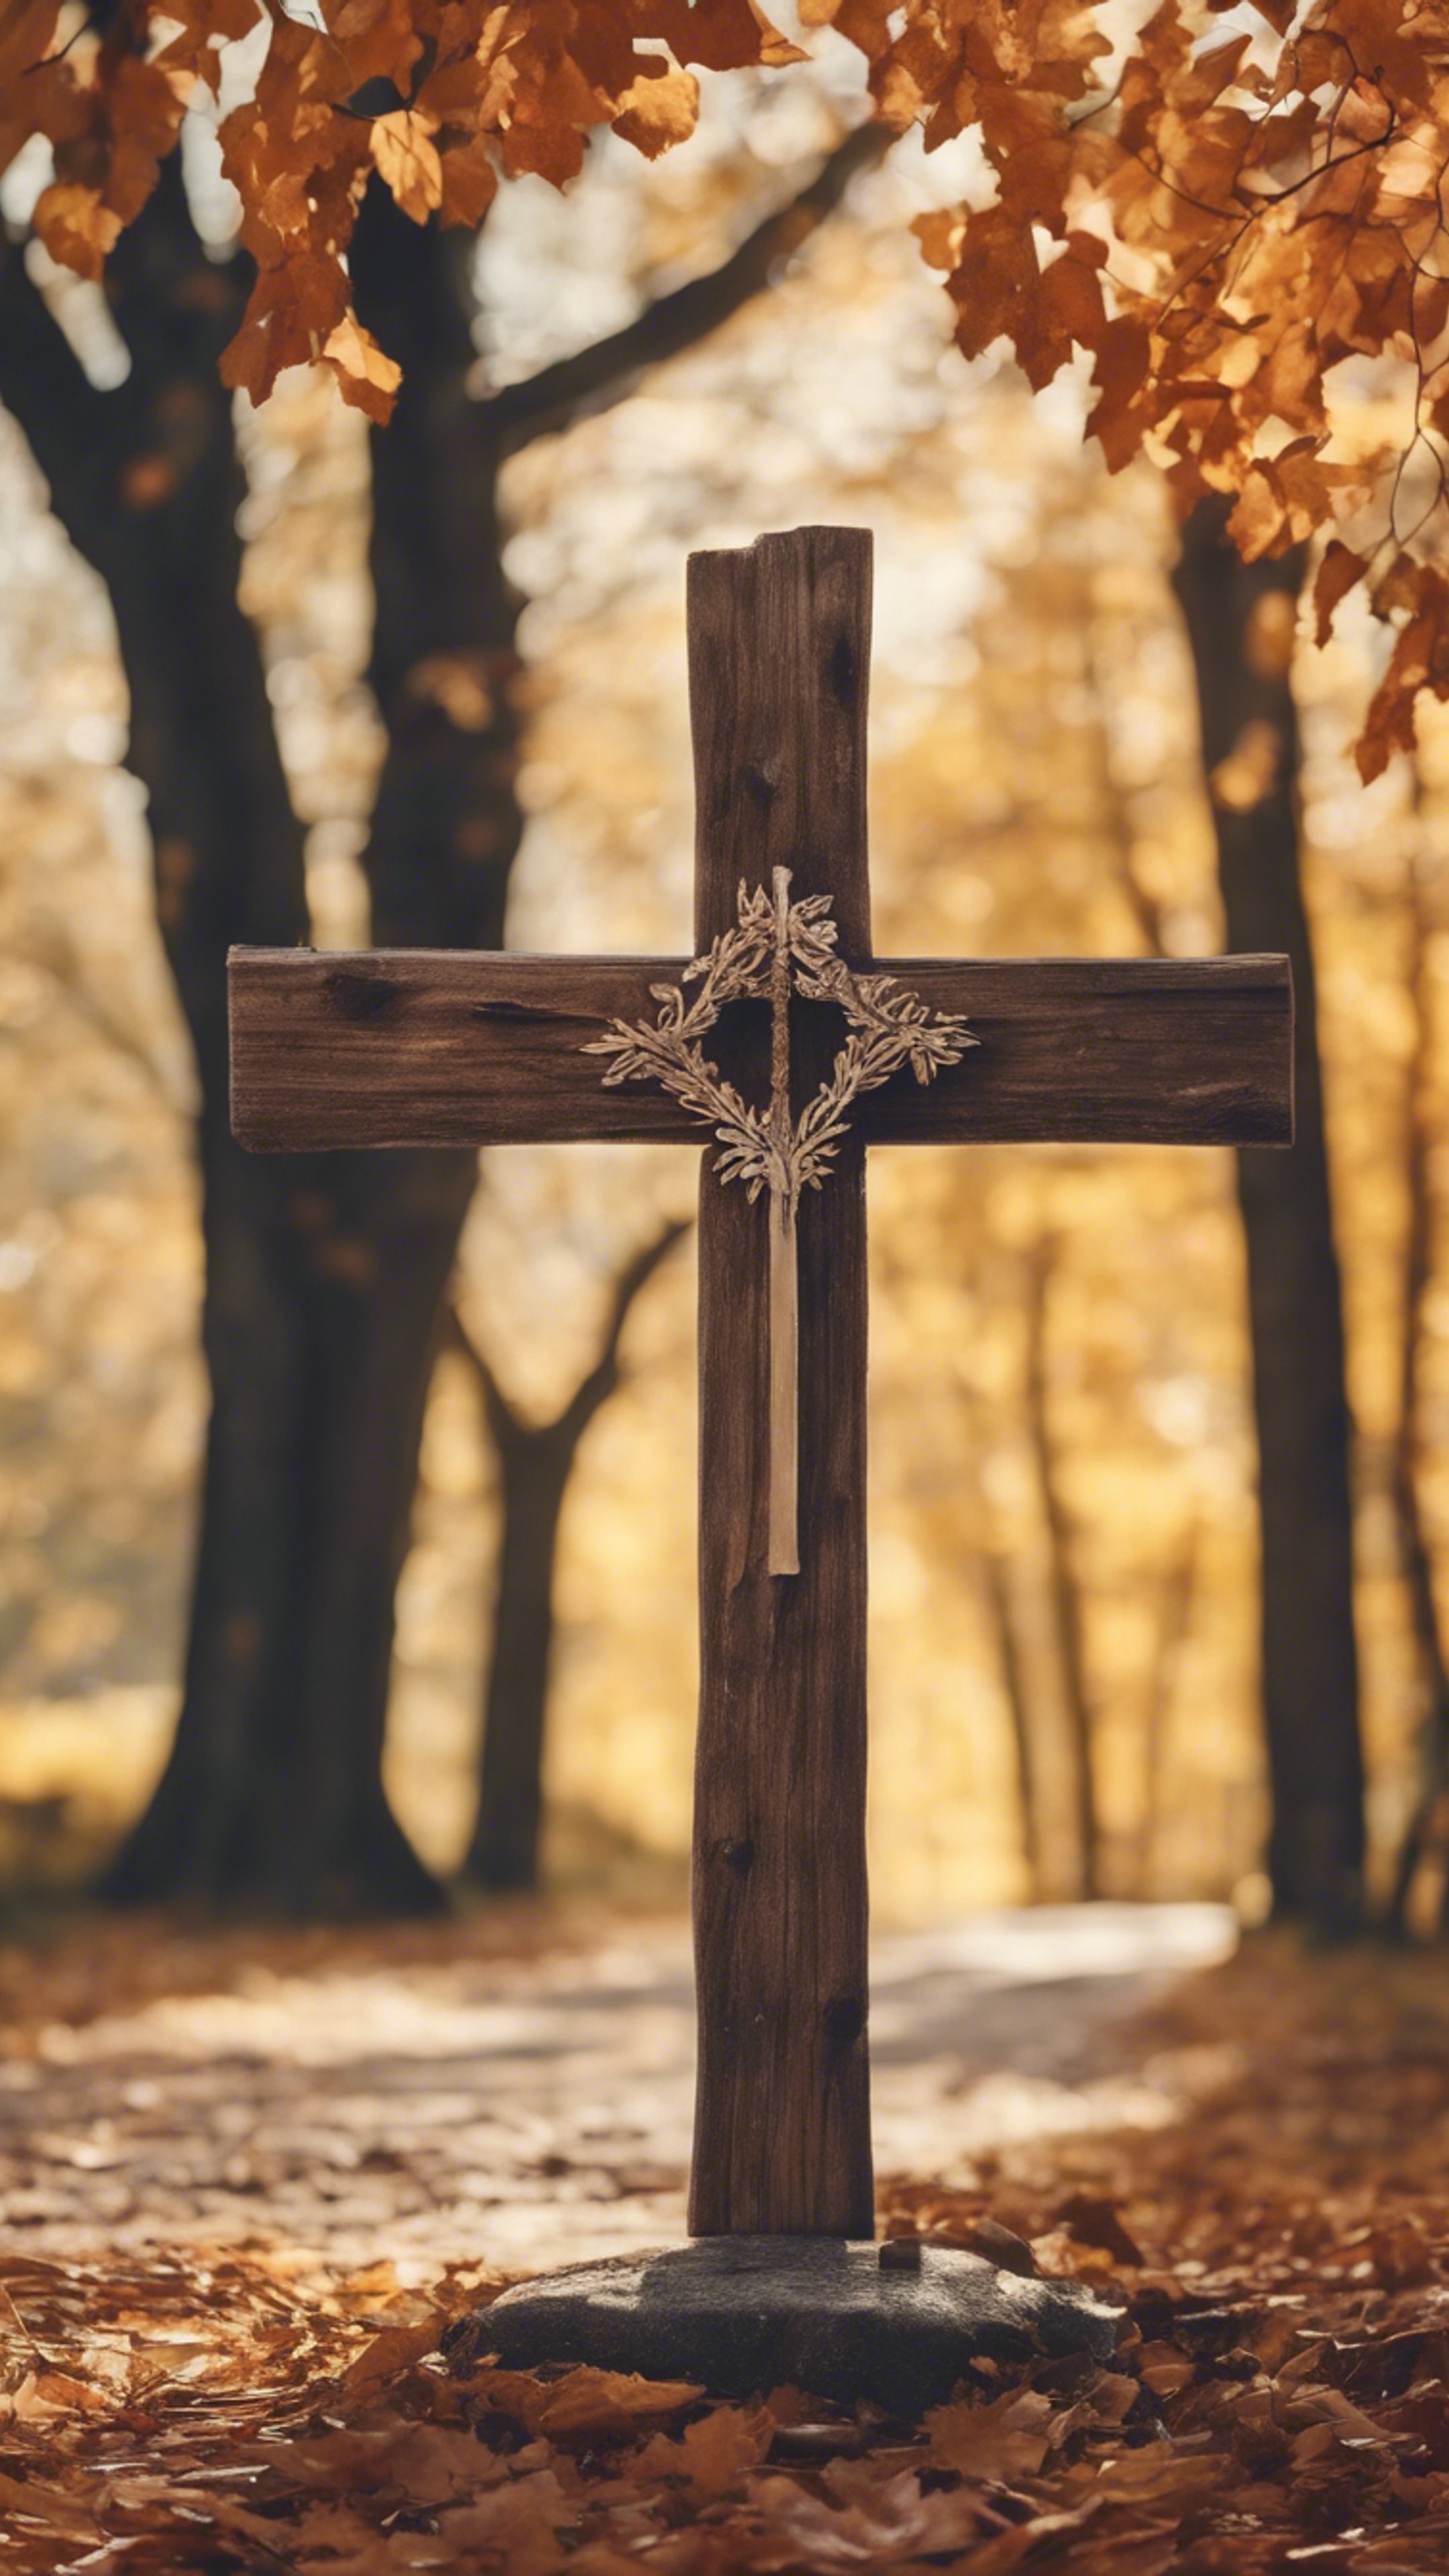 A rustic wooden cross standing by a country road, surrounded by autumn leaves. Tapet[8ef87987617941c481d6]